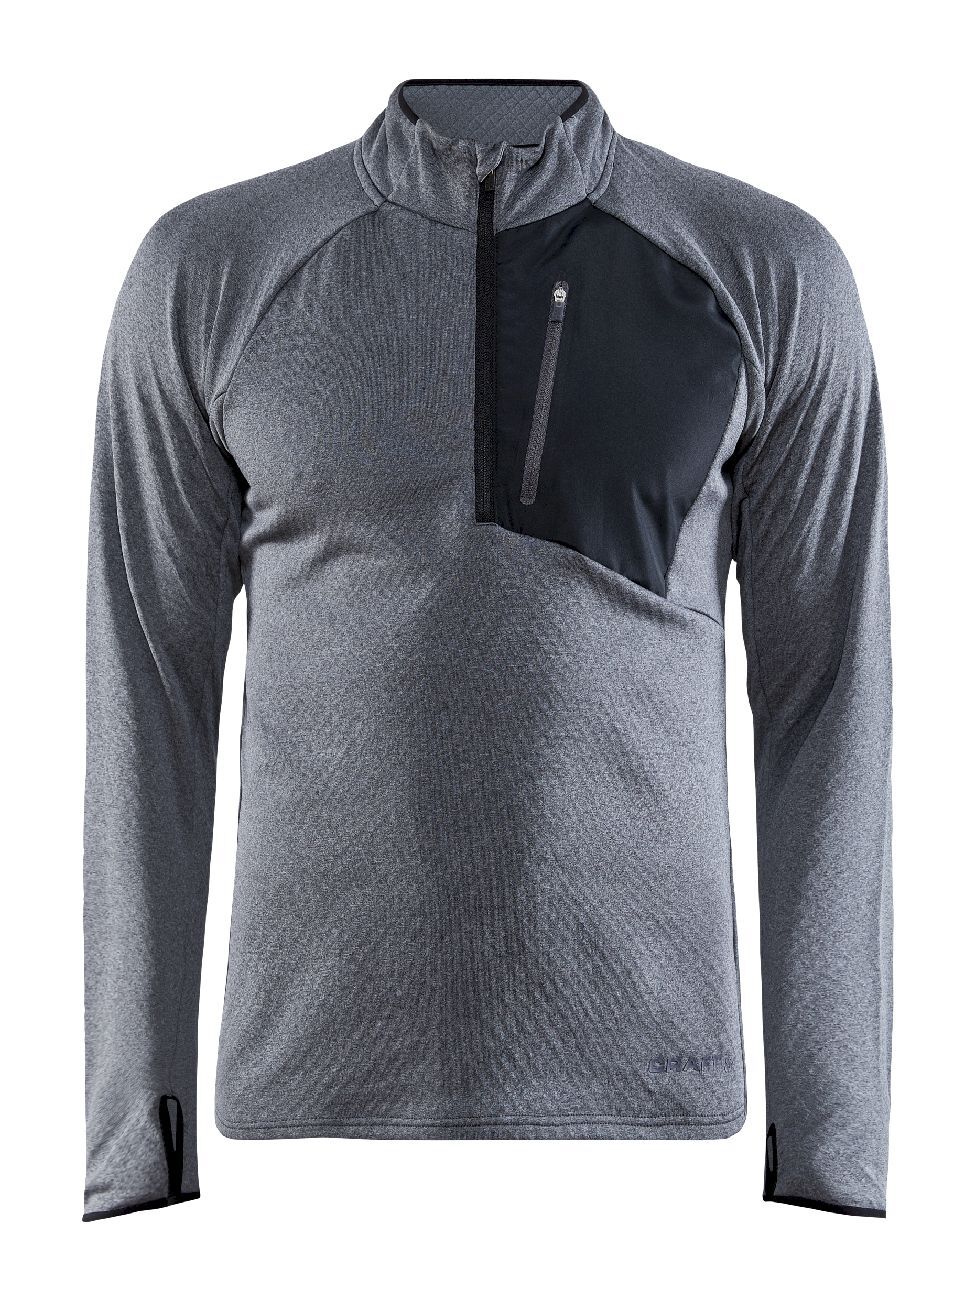 Craft Core Trim Thermal Midlayer - Giacca in pile - Uomo